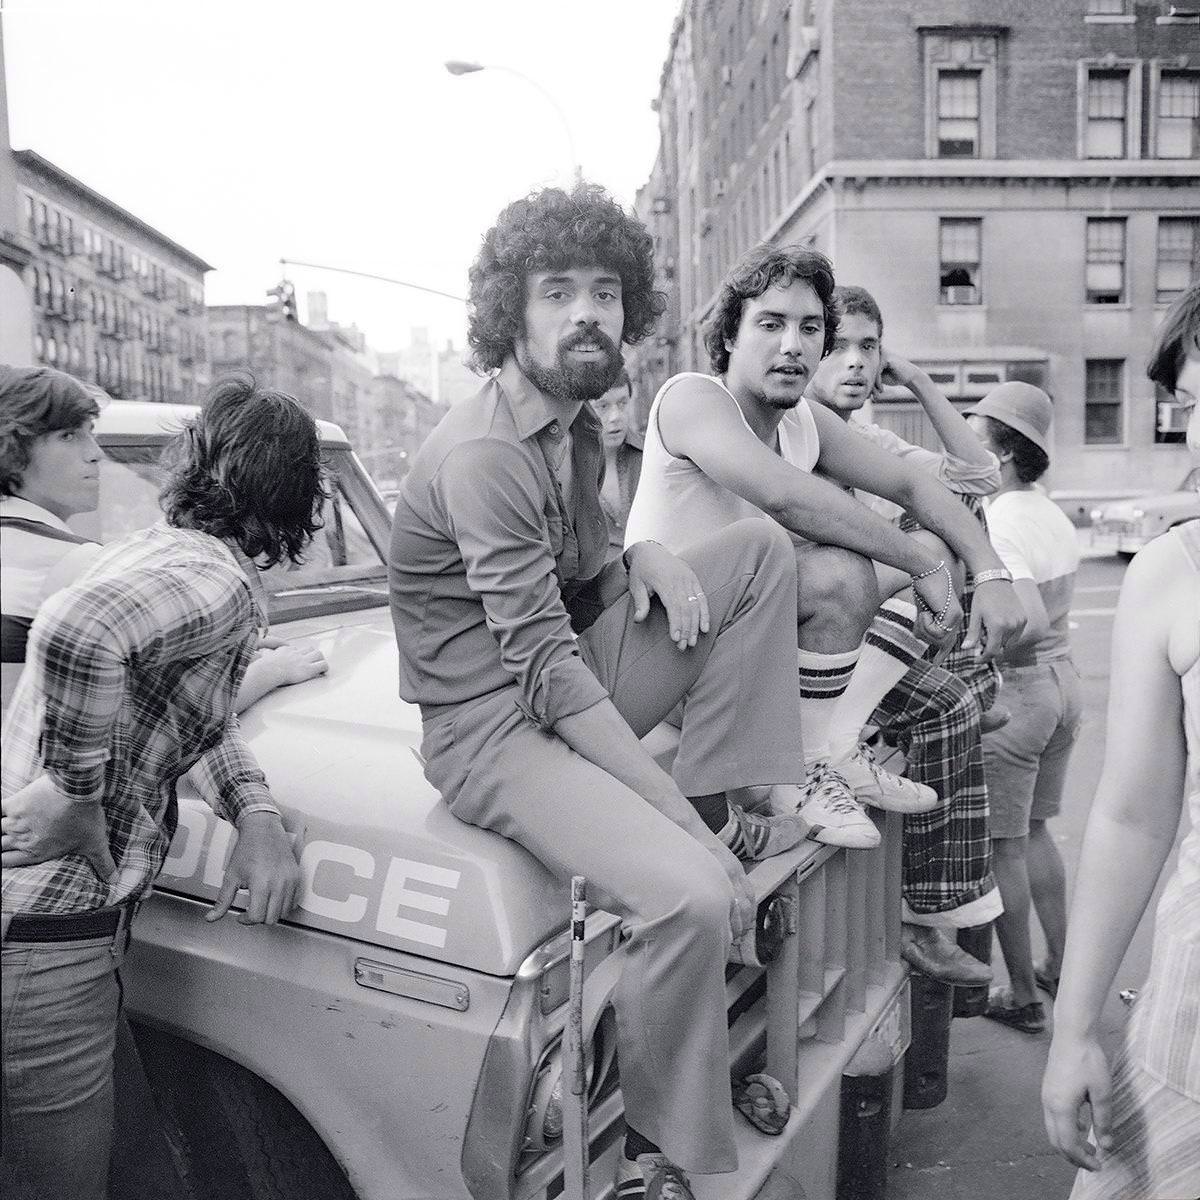 During The New York City Blackout Of 1977, Meryl Meisler Captured This Photo Of A Group Of Guys Hanging Out On The Hood Of A Police Car In New York City On July 13, 1977.